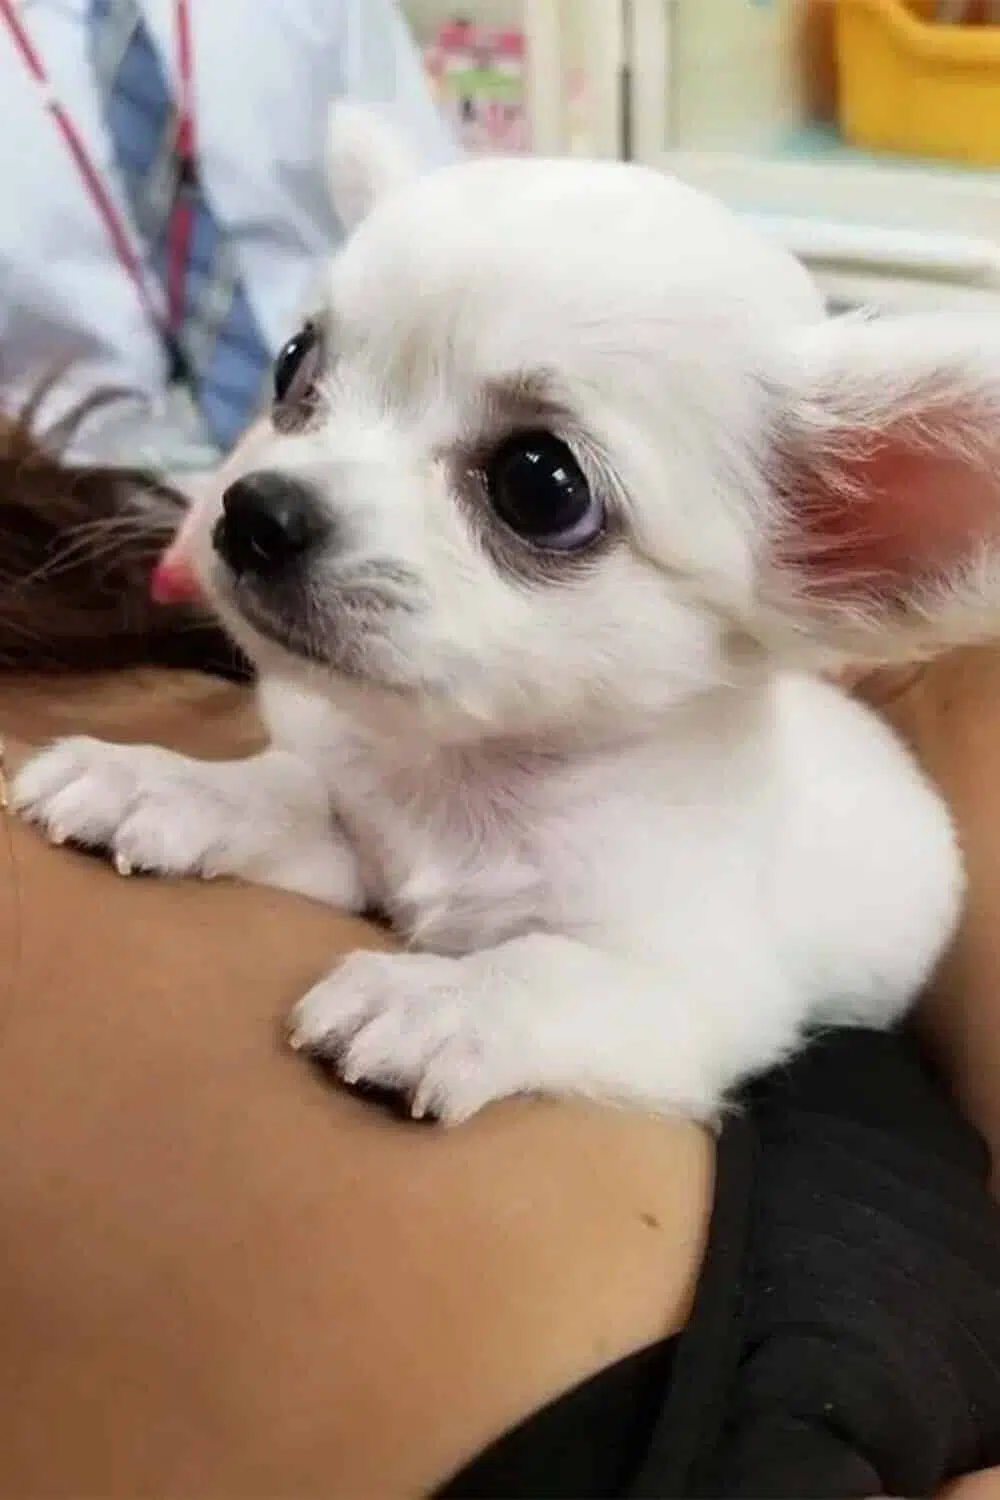 Chihuahuas Aren’t as Cute as Puppies
